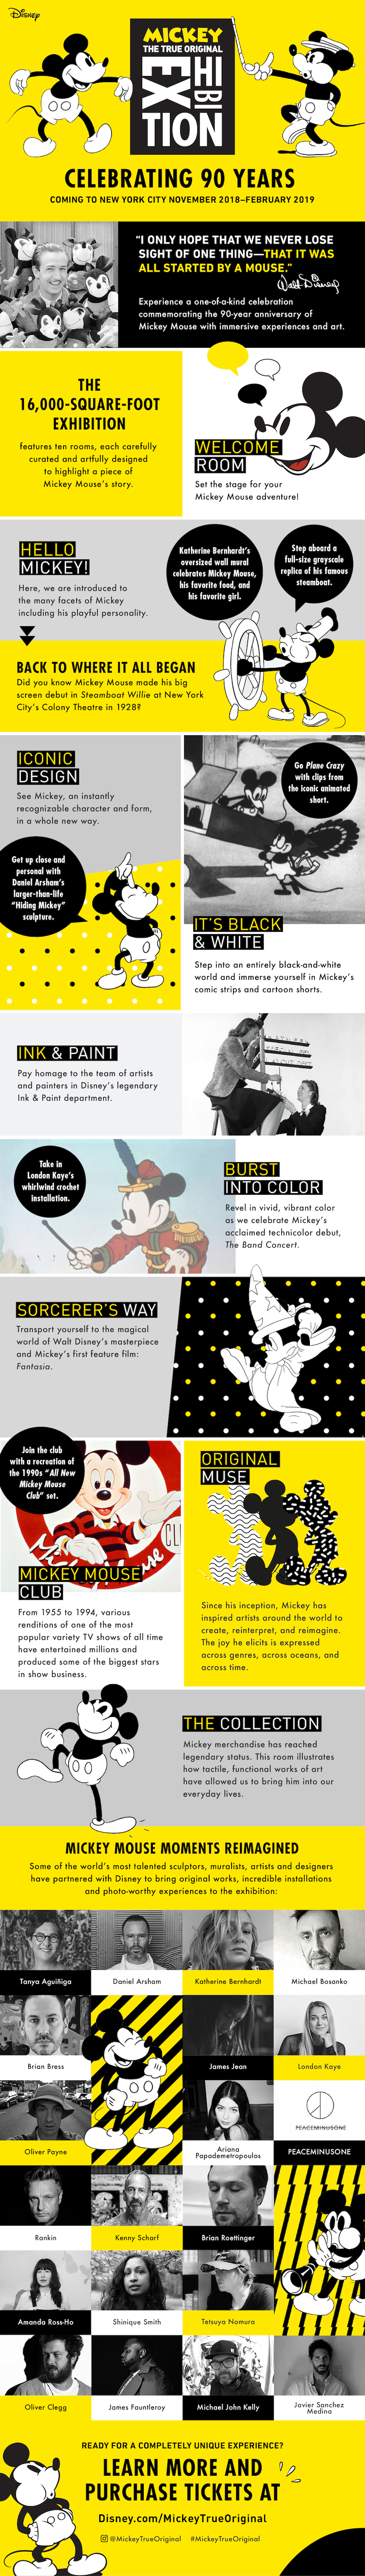 Disney Reveals Layout For Mickey: The True Original Exhibition In NYC ...